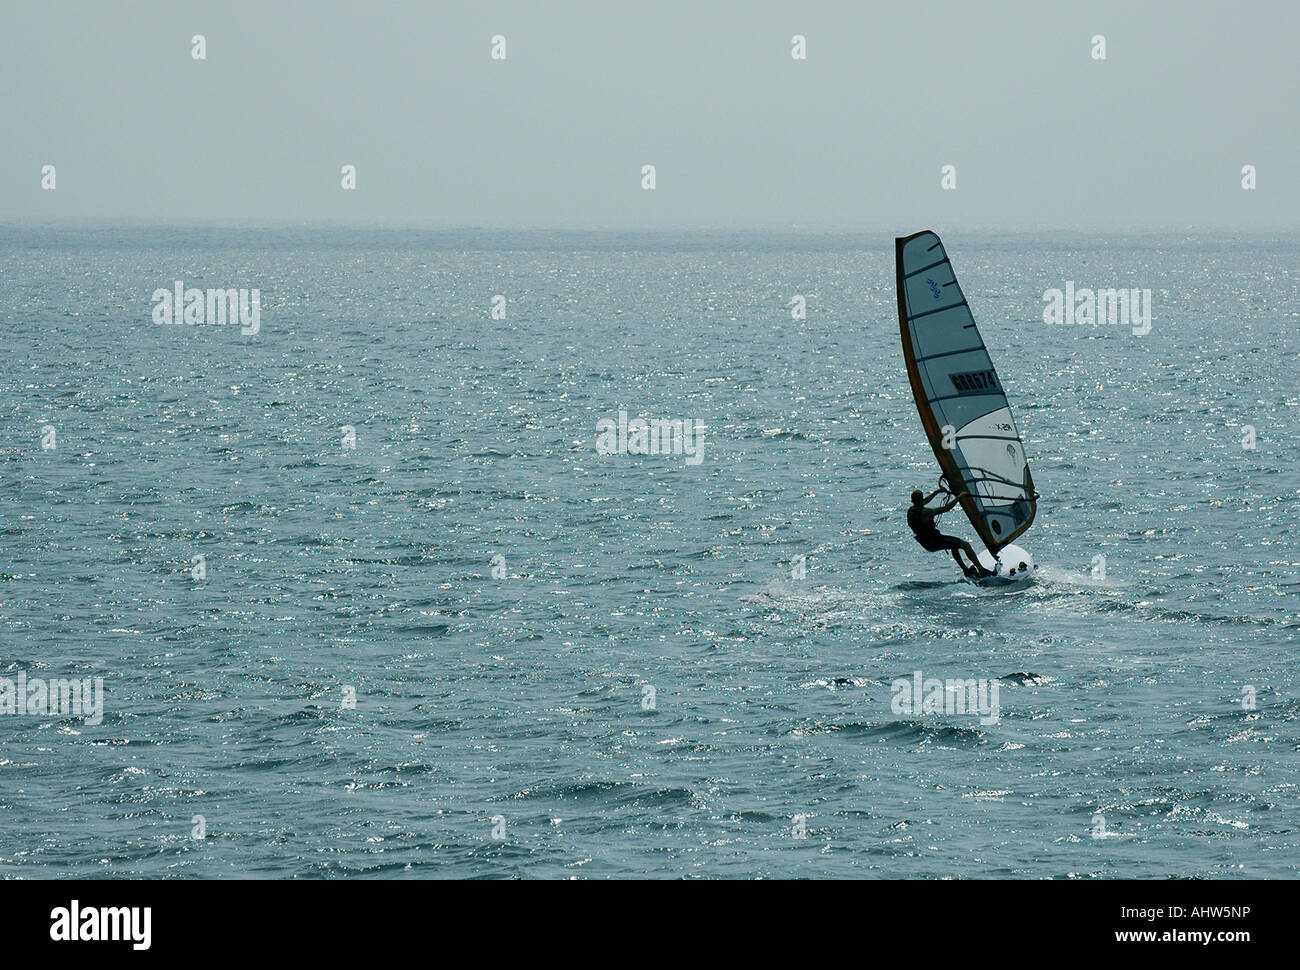 A Windsurfer heading out to Sea Stock Photo